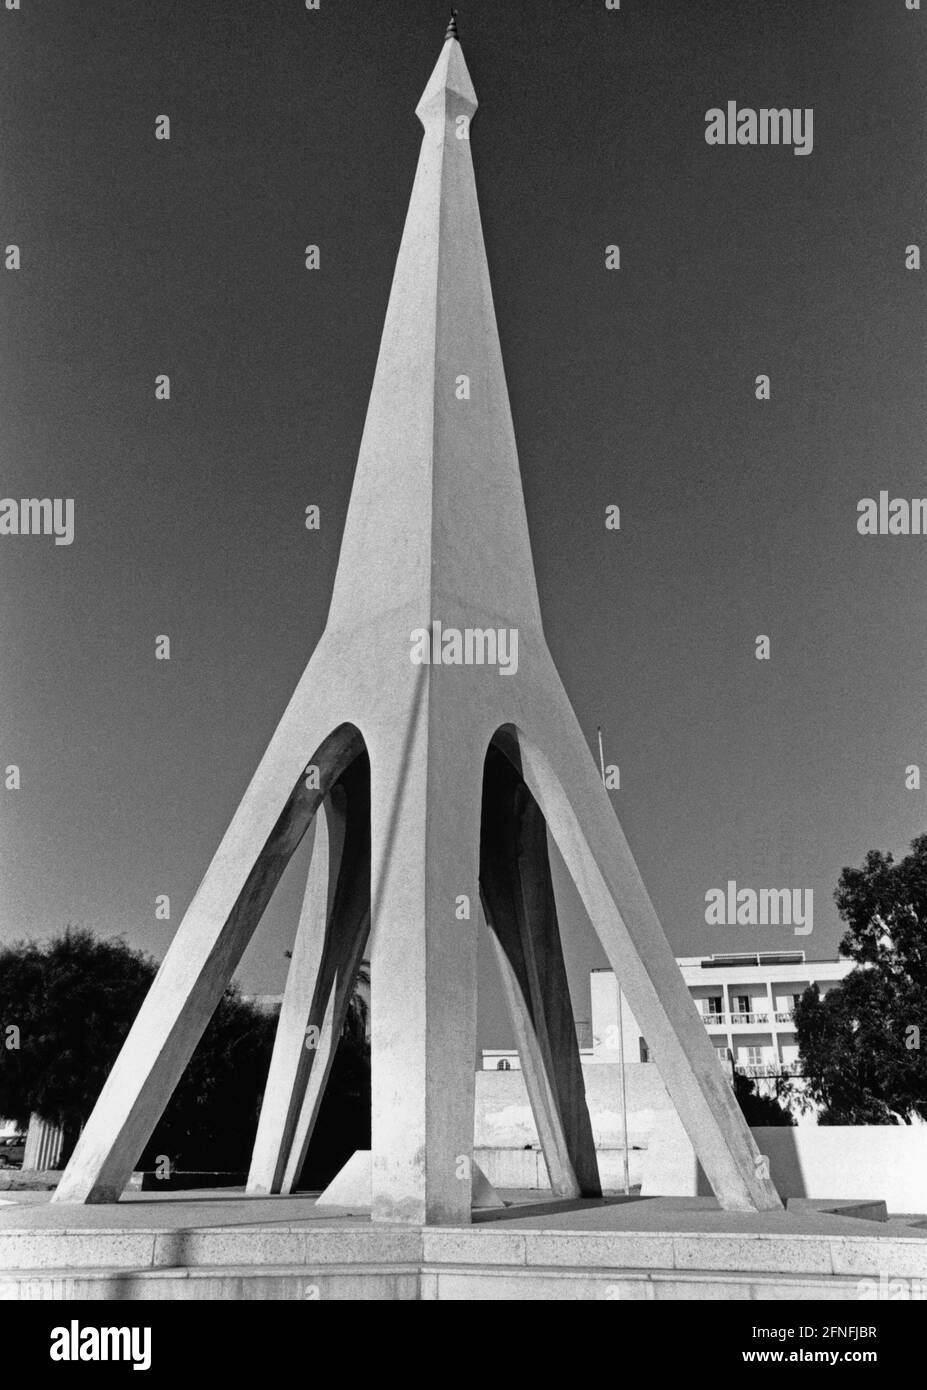 The monument, which is located in the Tunisian seaside resort of Hammamet, stands as a monument to liberation and the struggle for independence. It also symbolizes the five pillars of Islam, which are laid down in the Koran: Shahada (the unrestricted belief in the only God Allah and his messenger Muhammad), Salat (the 5 times a day prayer), Sakat (the duty to give alms), Saum (the fasting in the month of Ramadan), as well as the Hajj (the pilgrimage to Mecca). [automated translation] Stock Photo